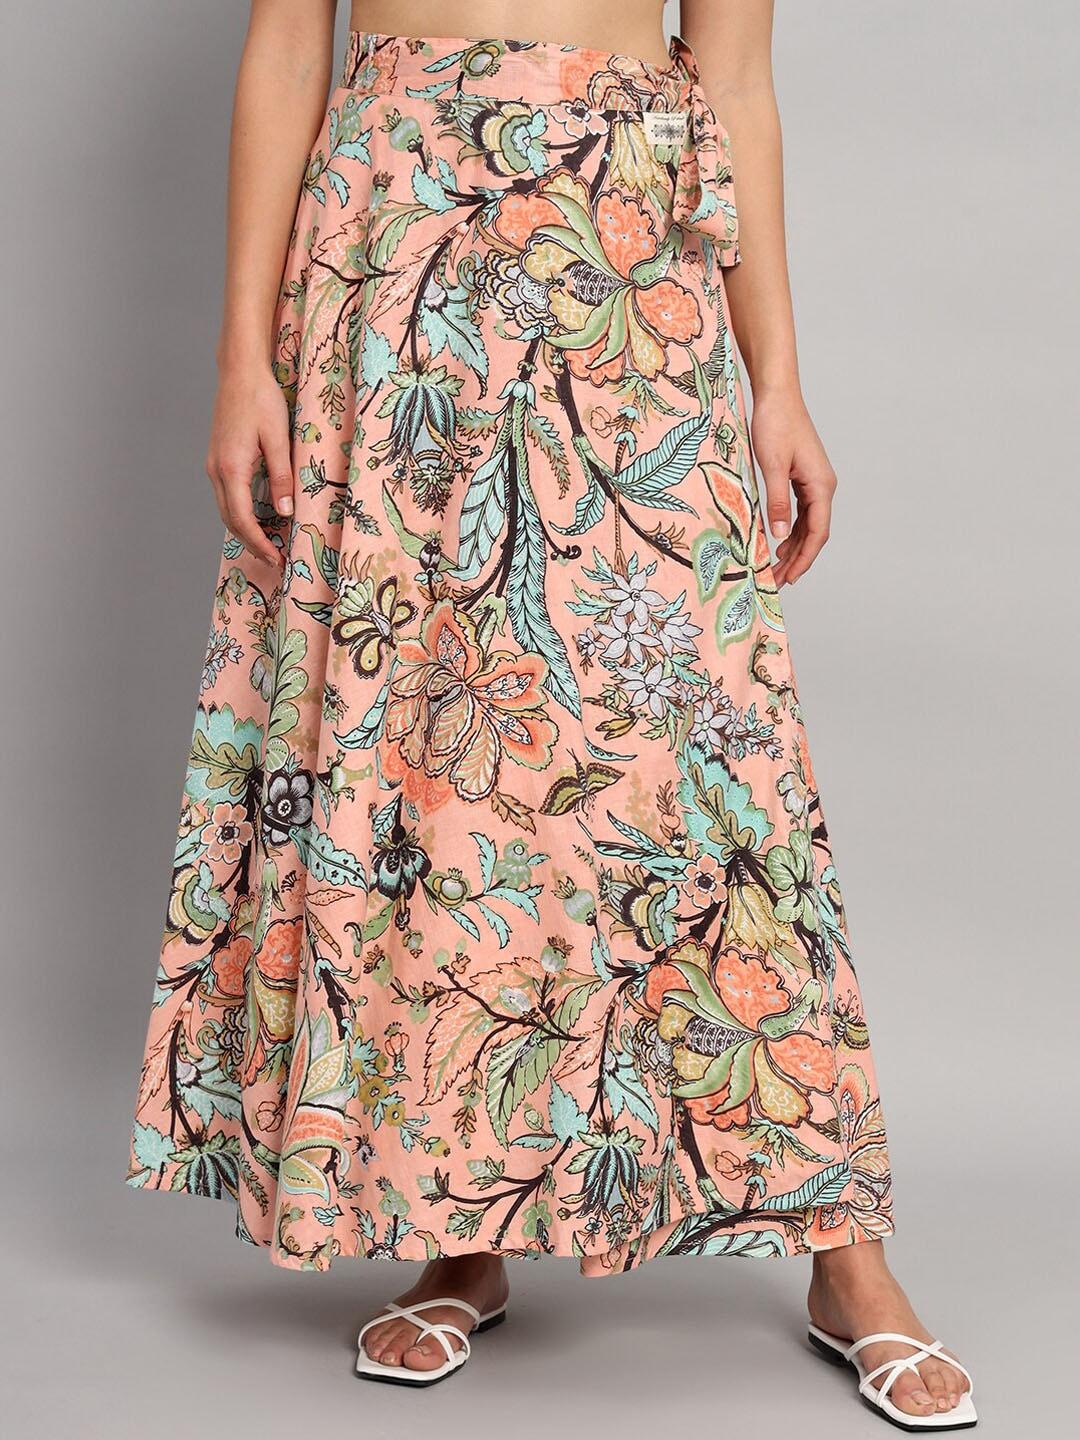 HANDICRAFT PALACE Floral Printed Pure Cotton Maxi Skirt